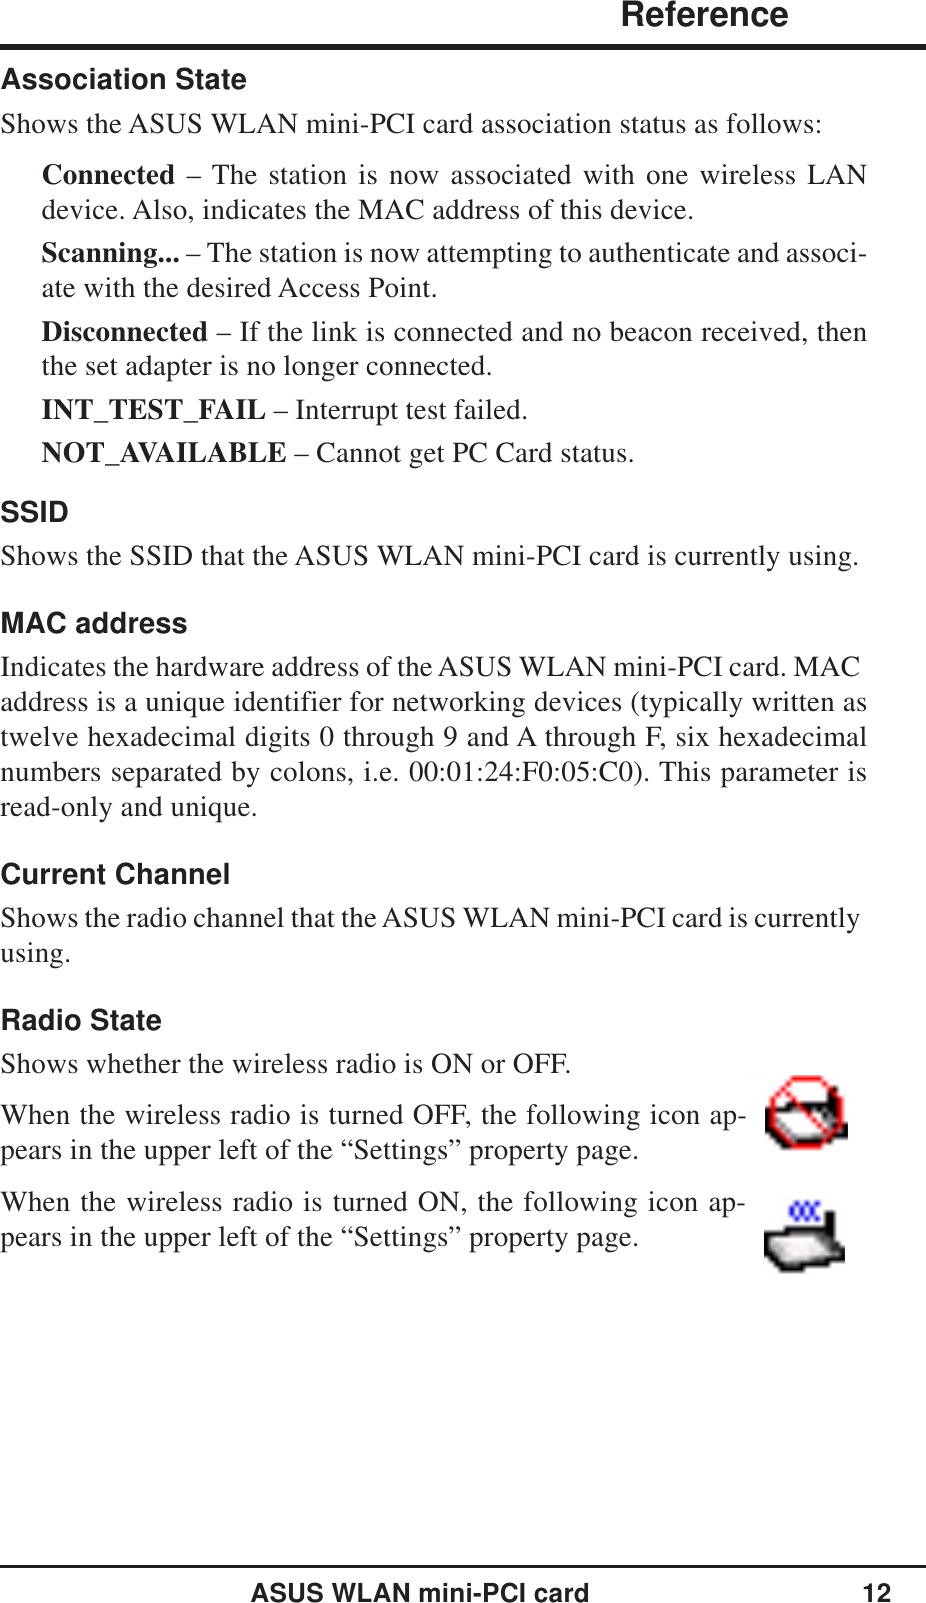 ASUS WLAN mini-PCI card 12                ReferenceChapter 3Association StateShows the ASUS WLAN mini-PCI card association status as follows:Connected – The station is now associated with one wireless LANdevice. Also, indicates the MAC address of this device.Scanning... – The station is now attempting to authenticate and associ-ate with the desired Access Point.Disconnected – If the link is connected and no beacon received, thenthe set adapter is no longer connected.INT_TEST_FAIL – Interrupt test failed.NOT_AVAILABLE – Cannot get PC Card status.SSIDShows the SSID that the ASUS WLAN mini-PCI card is currently using.MAC addressIndicates the hardware address of the ASUS WLAN mini-PCI card. MACaddress is a unique identifier for networking devices (typically written astwelve hexadecimal digits 0 through 9 and A through F, six hexadecimalnumbers separated by colons, i.e. 00:01:24:F0:05:C0). This parameter isread-only and unique.Current ChannelShows the radio channel that the ASUS WLAN mini-PCI card is currentlyusing.Radio StateShows whether the wireless radio is ON or OFF.When the wireless radio is turned OFF, the following icon ap-pears in the upper left of the “Settings” property page.When the wireless radio is turned ON, the following icon ap-pears in the upper left of the “Settings” property page.